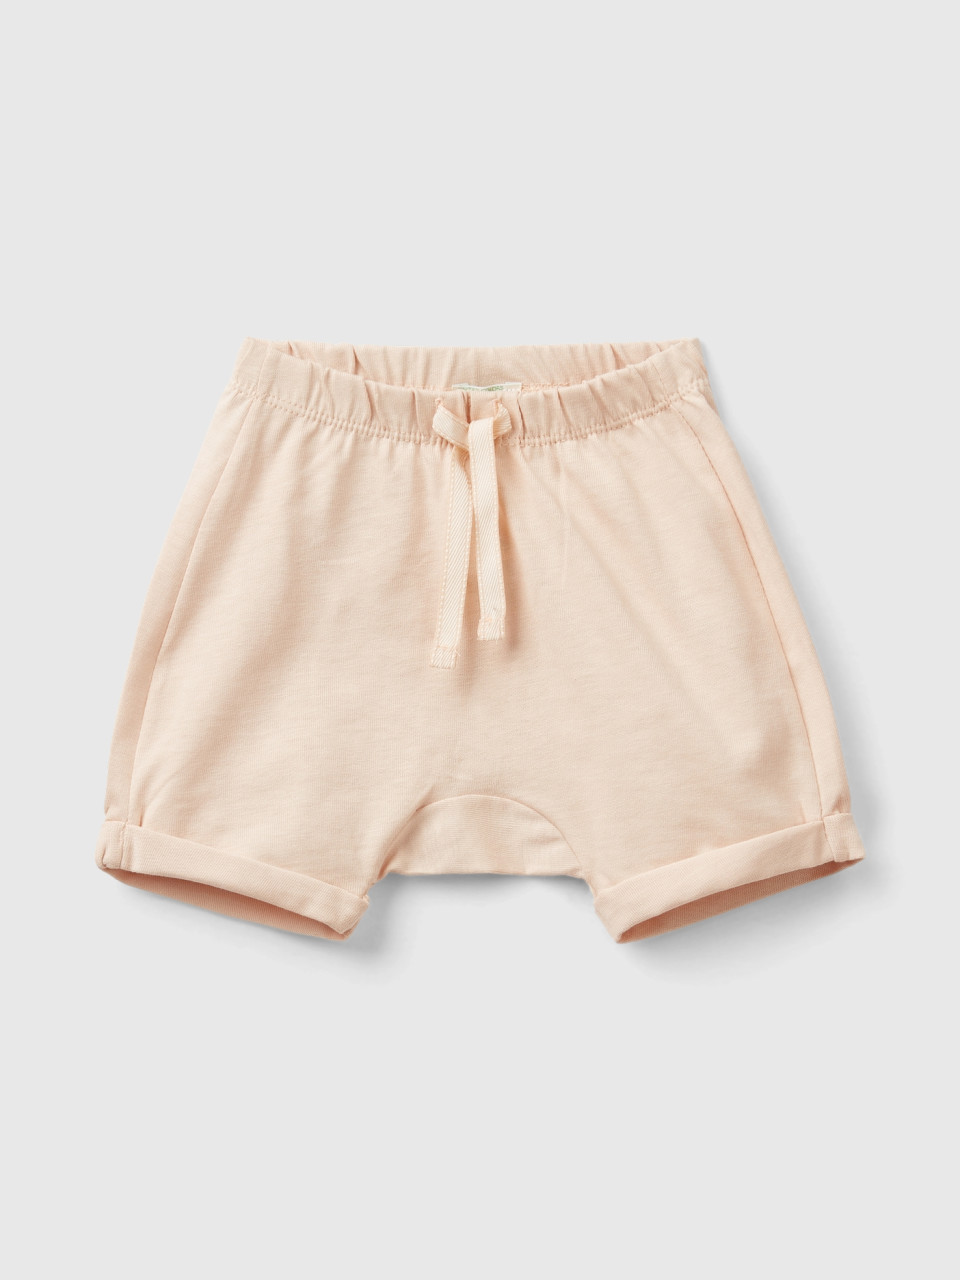 Benetton, Shorts With Patch On The Back, Peach, Kids